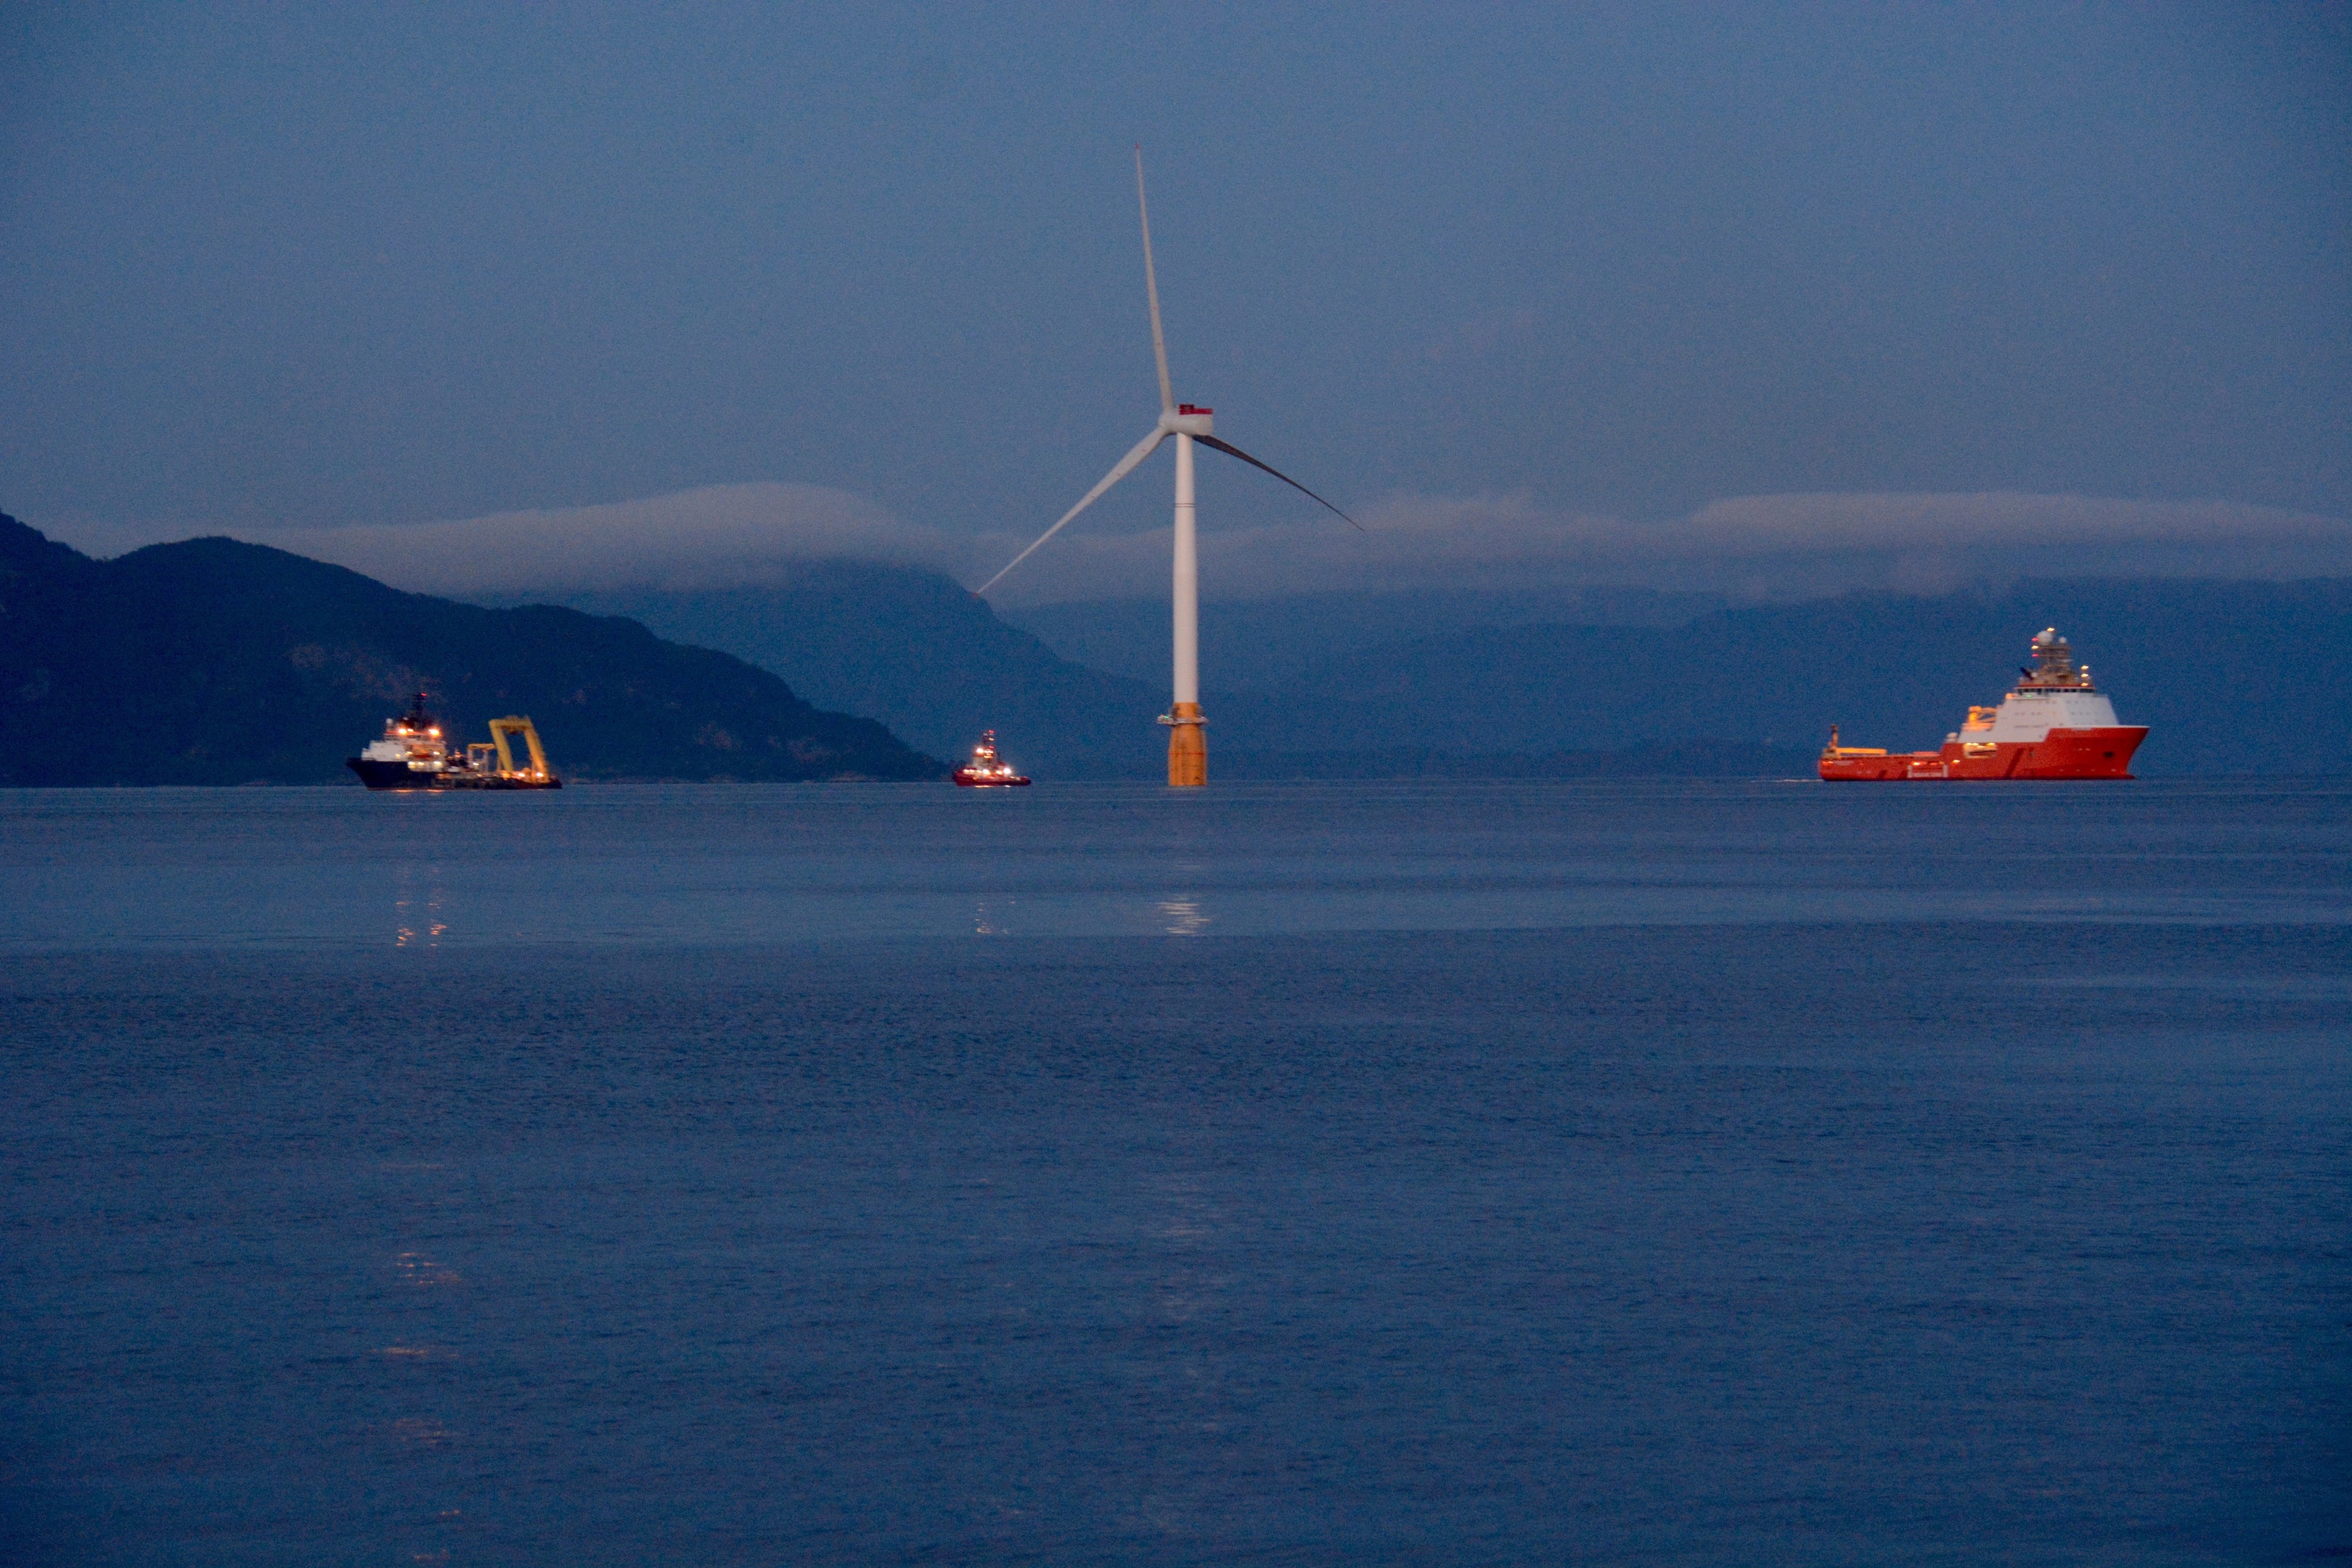 One of the turbines for the Hywind Floating Wind Farm off Scotland. Photo by Eva Sleire, Equinor.